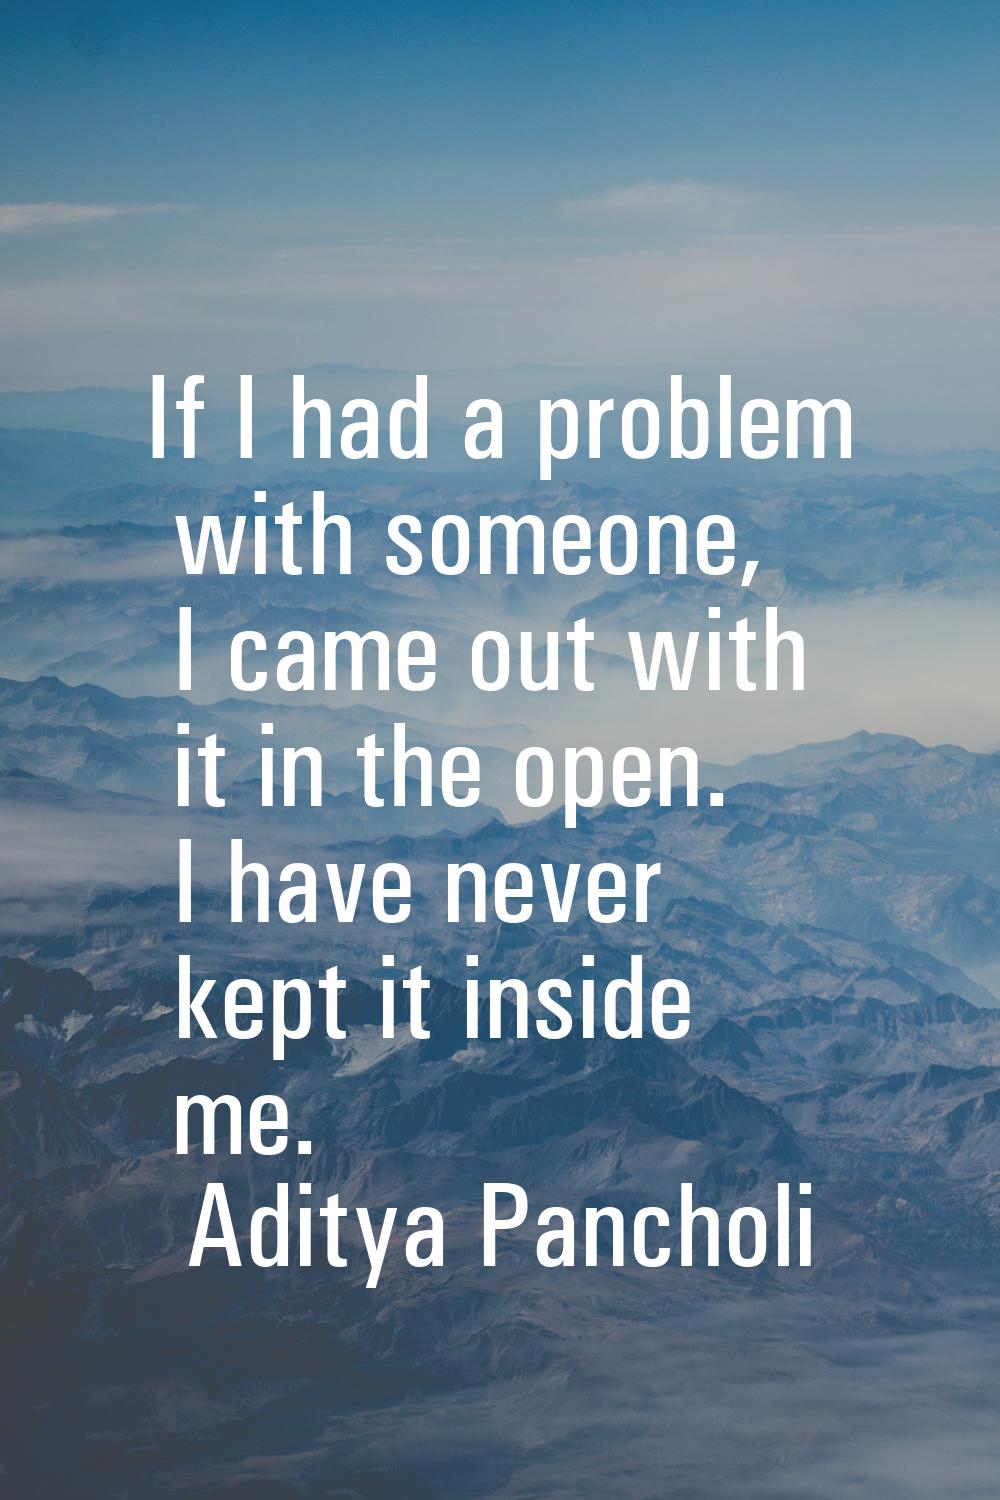 If I had a problem with someone, I came out with it in the open. I have never kept it inside me.